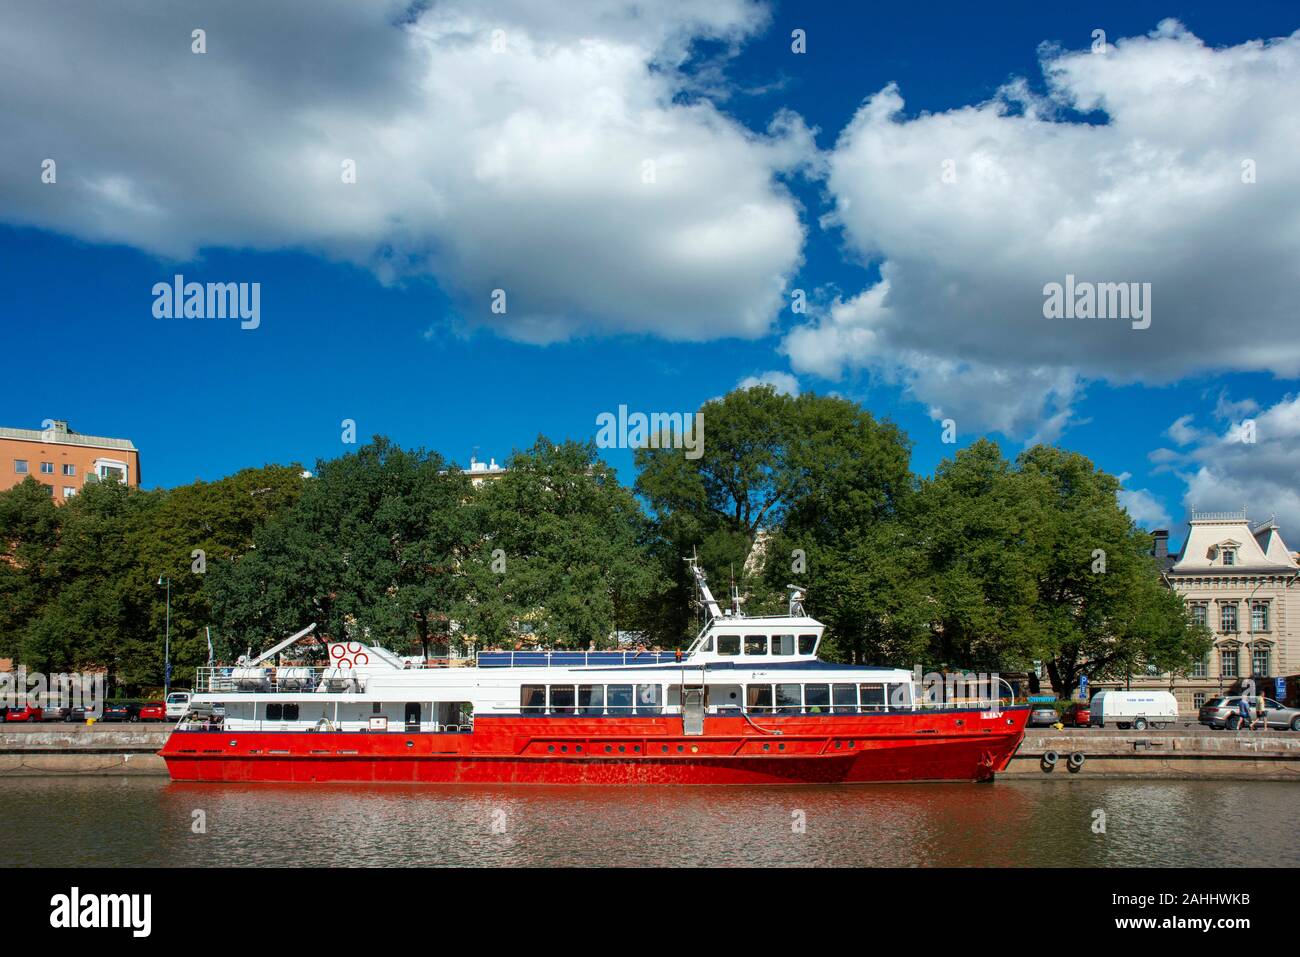 Old town hall and buildings on the banks of the River Aura in Turku Finland. Stock Photo